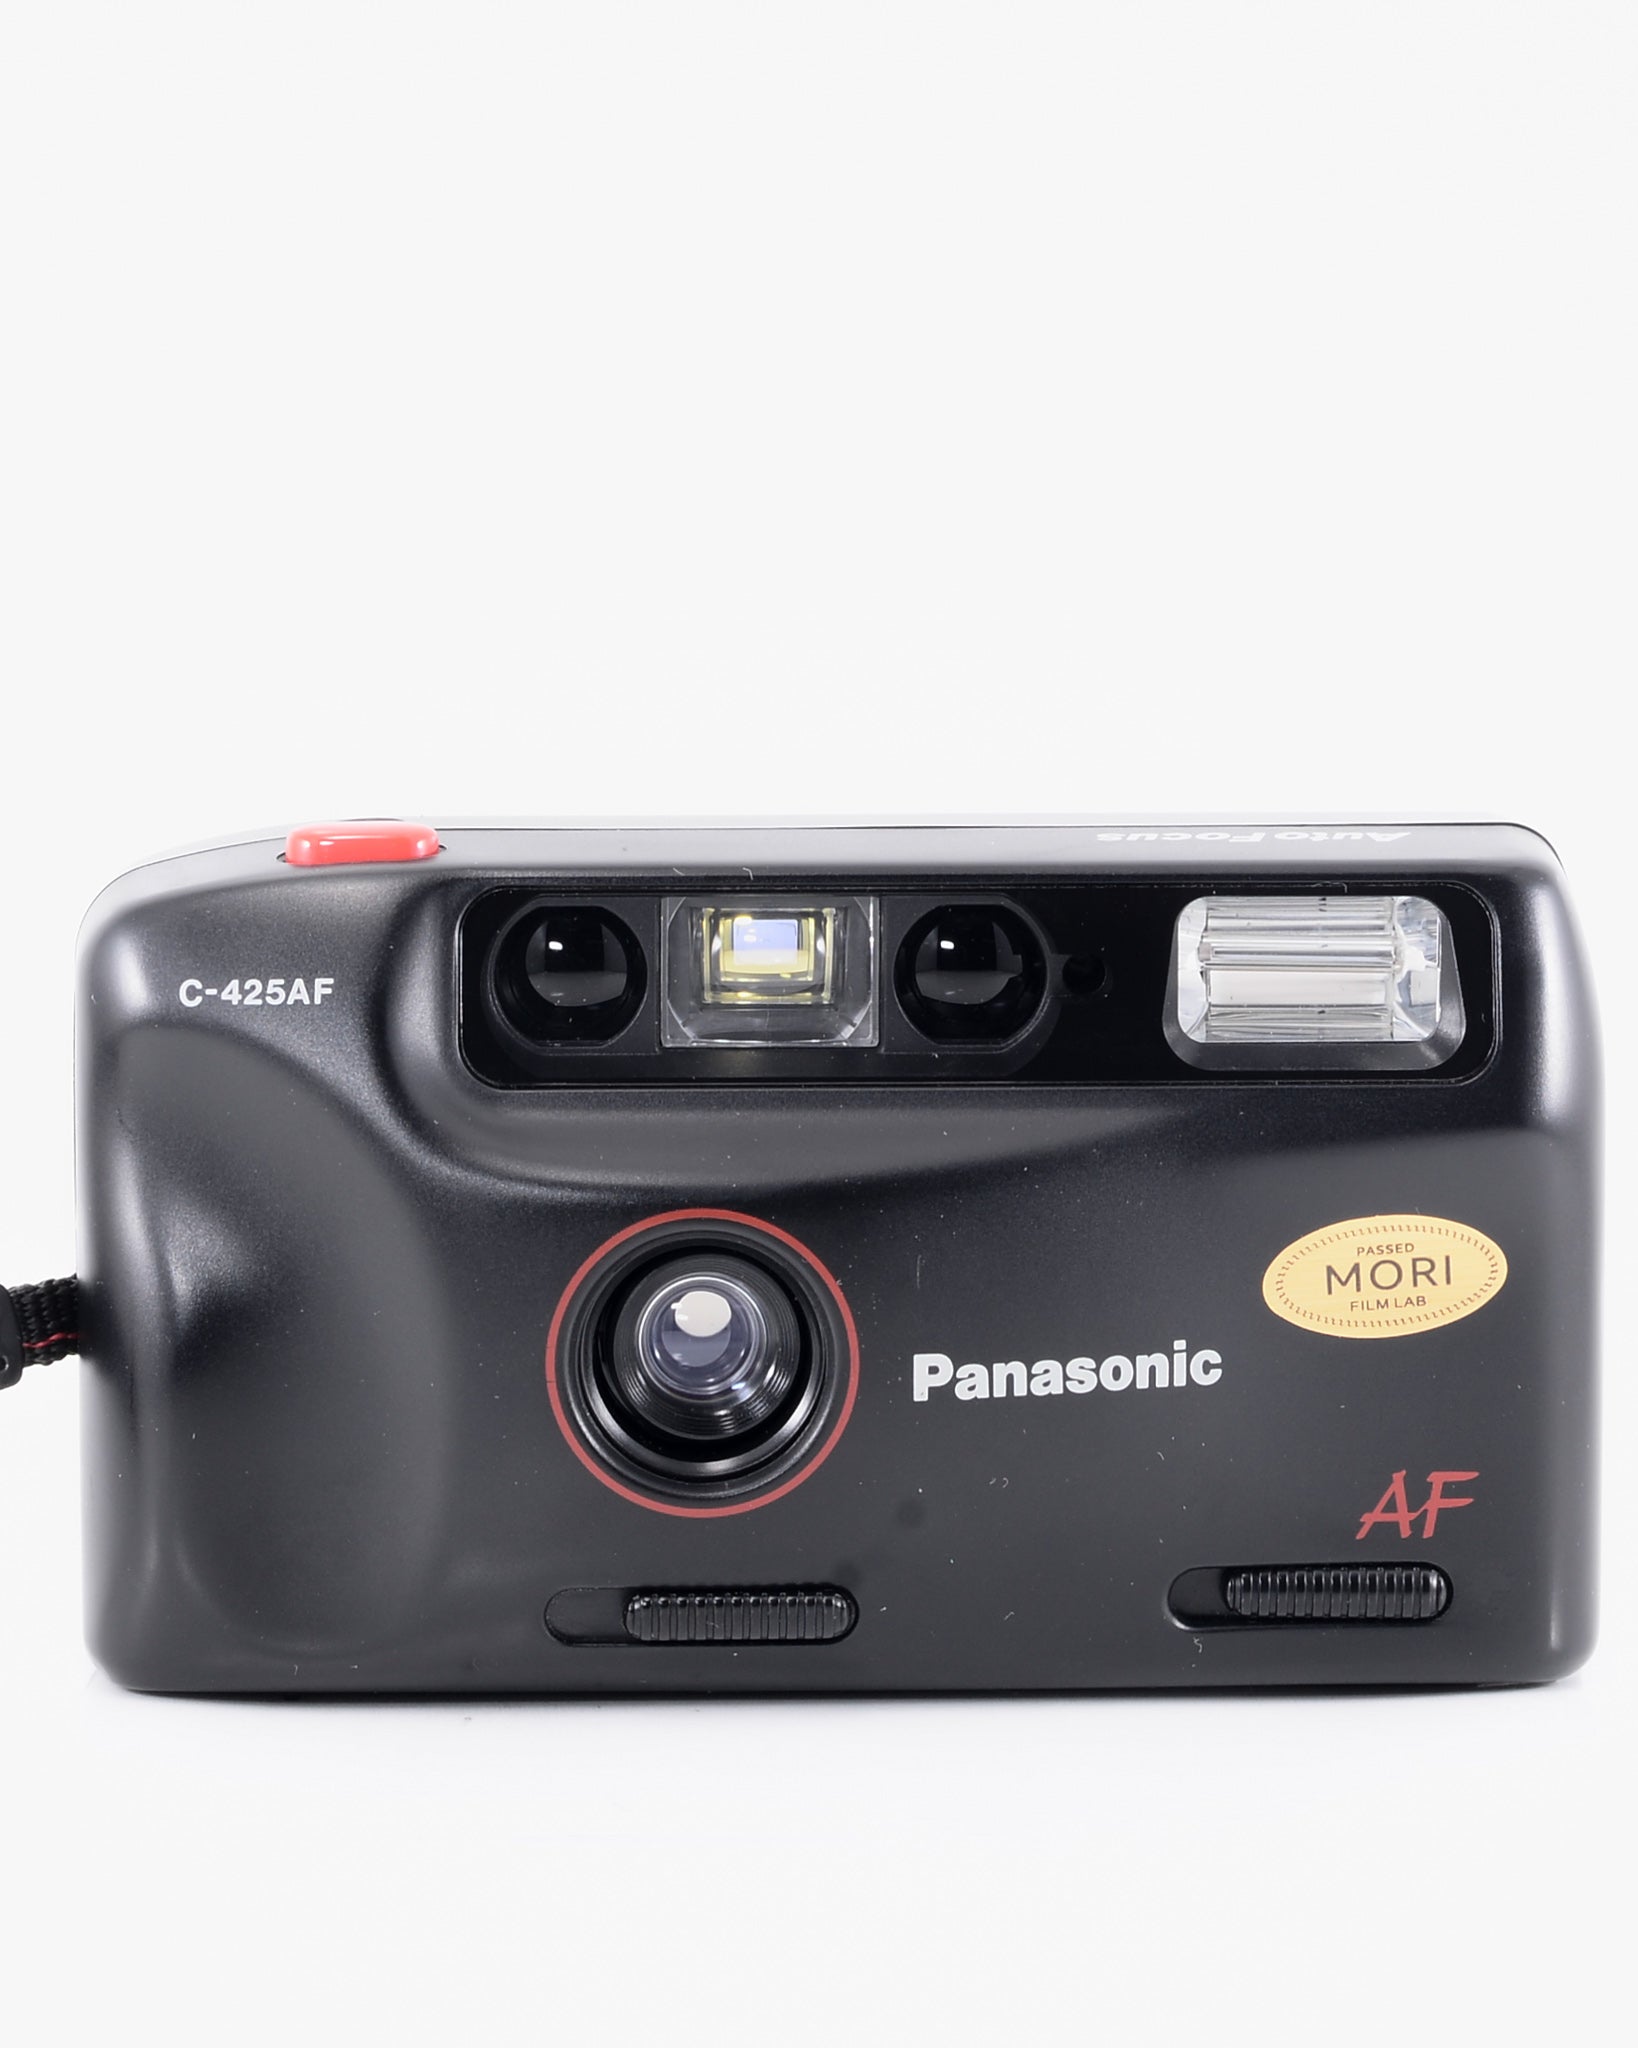 Panasonic C-425AF 35mm point & shoot film camera with 34mm f3.8 lens